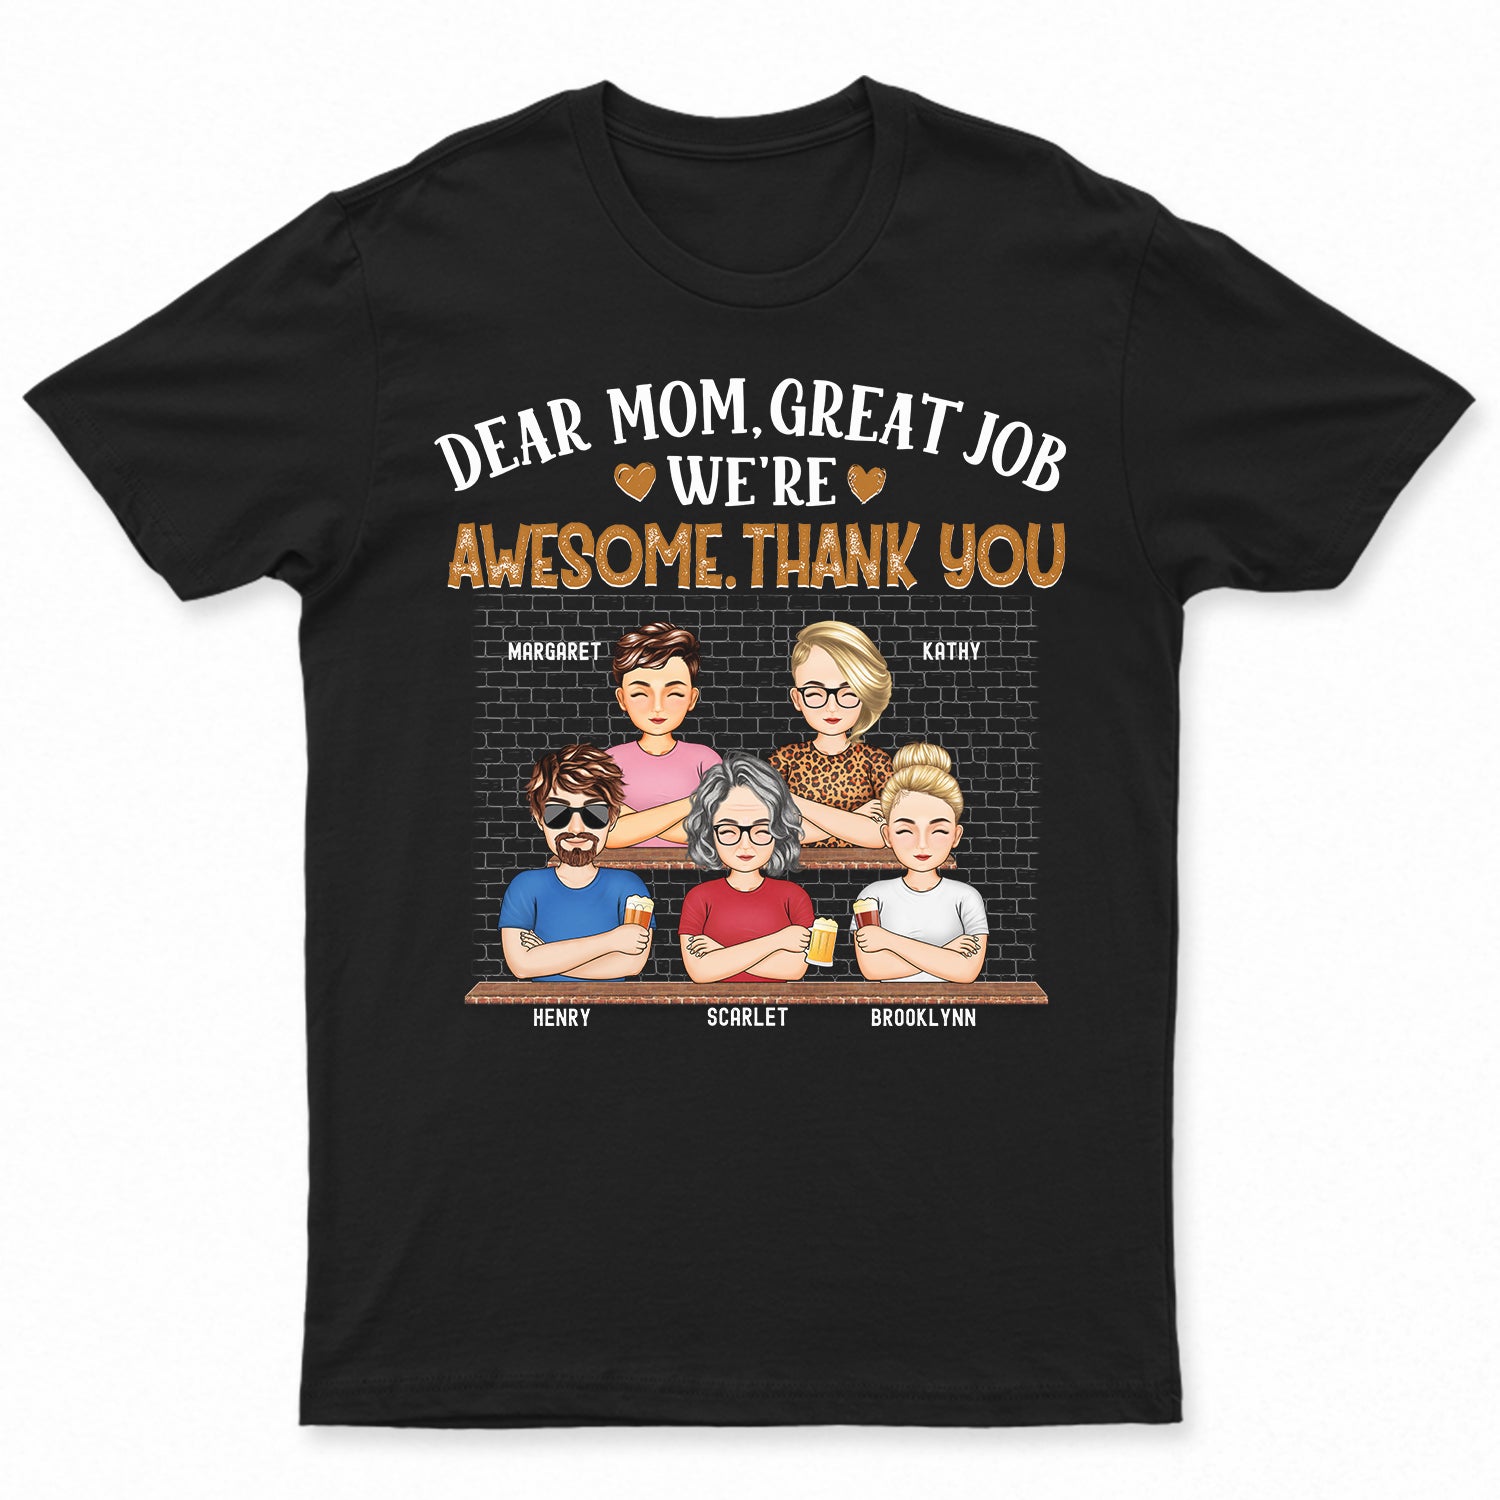 Dear Mom Great Job We're Awesome Thank You - Loving Gift For Mommy, Mother, Grandma, Grandmother - Personalized Custom T Shirt